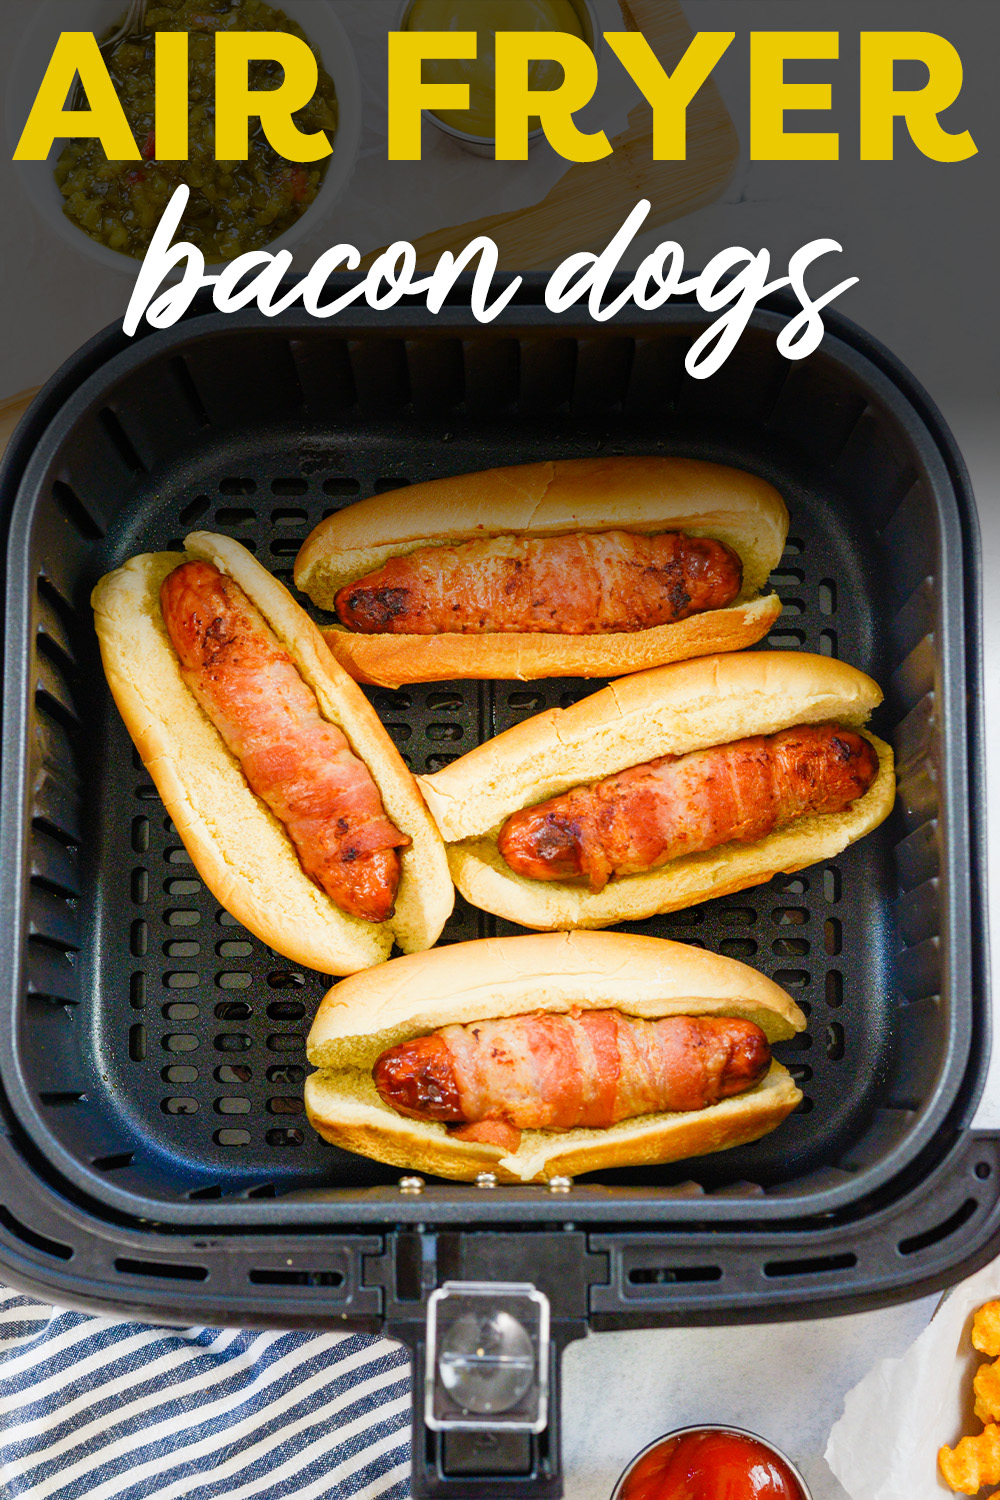 Bacon wrapped hot dogs are a fantastic adult way way to eat hot dogs.  Cook them easily in your air fryer!